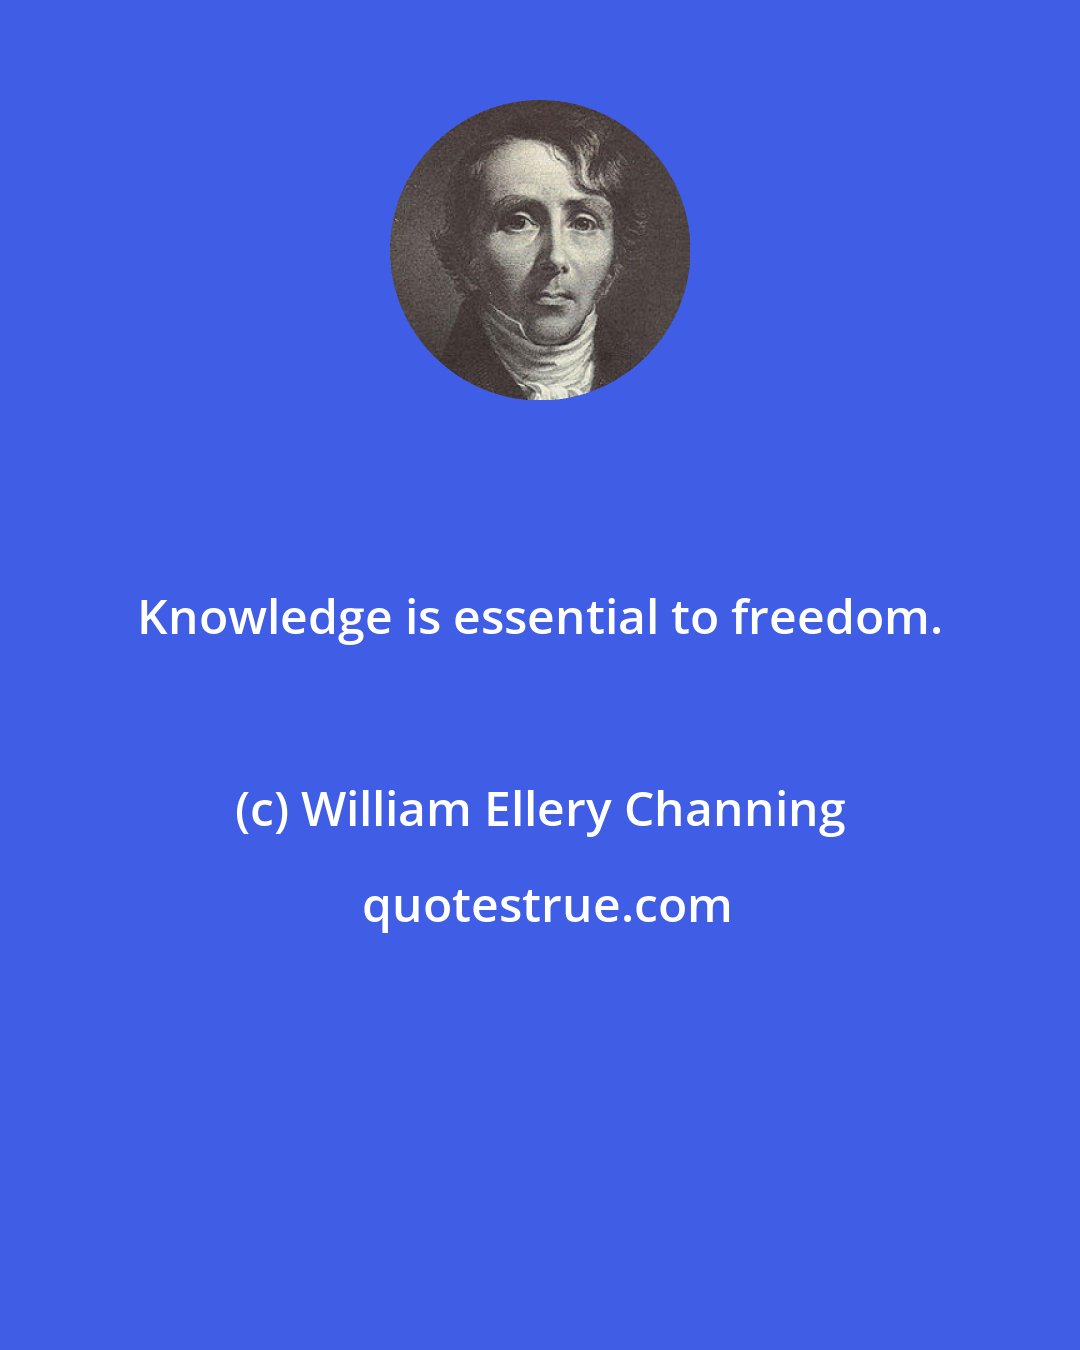 William Ellery Channing: Knowledge is essential to freedom.